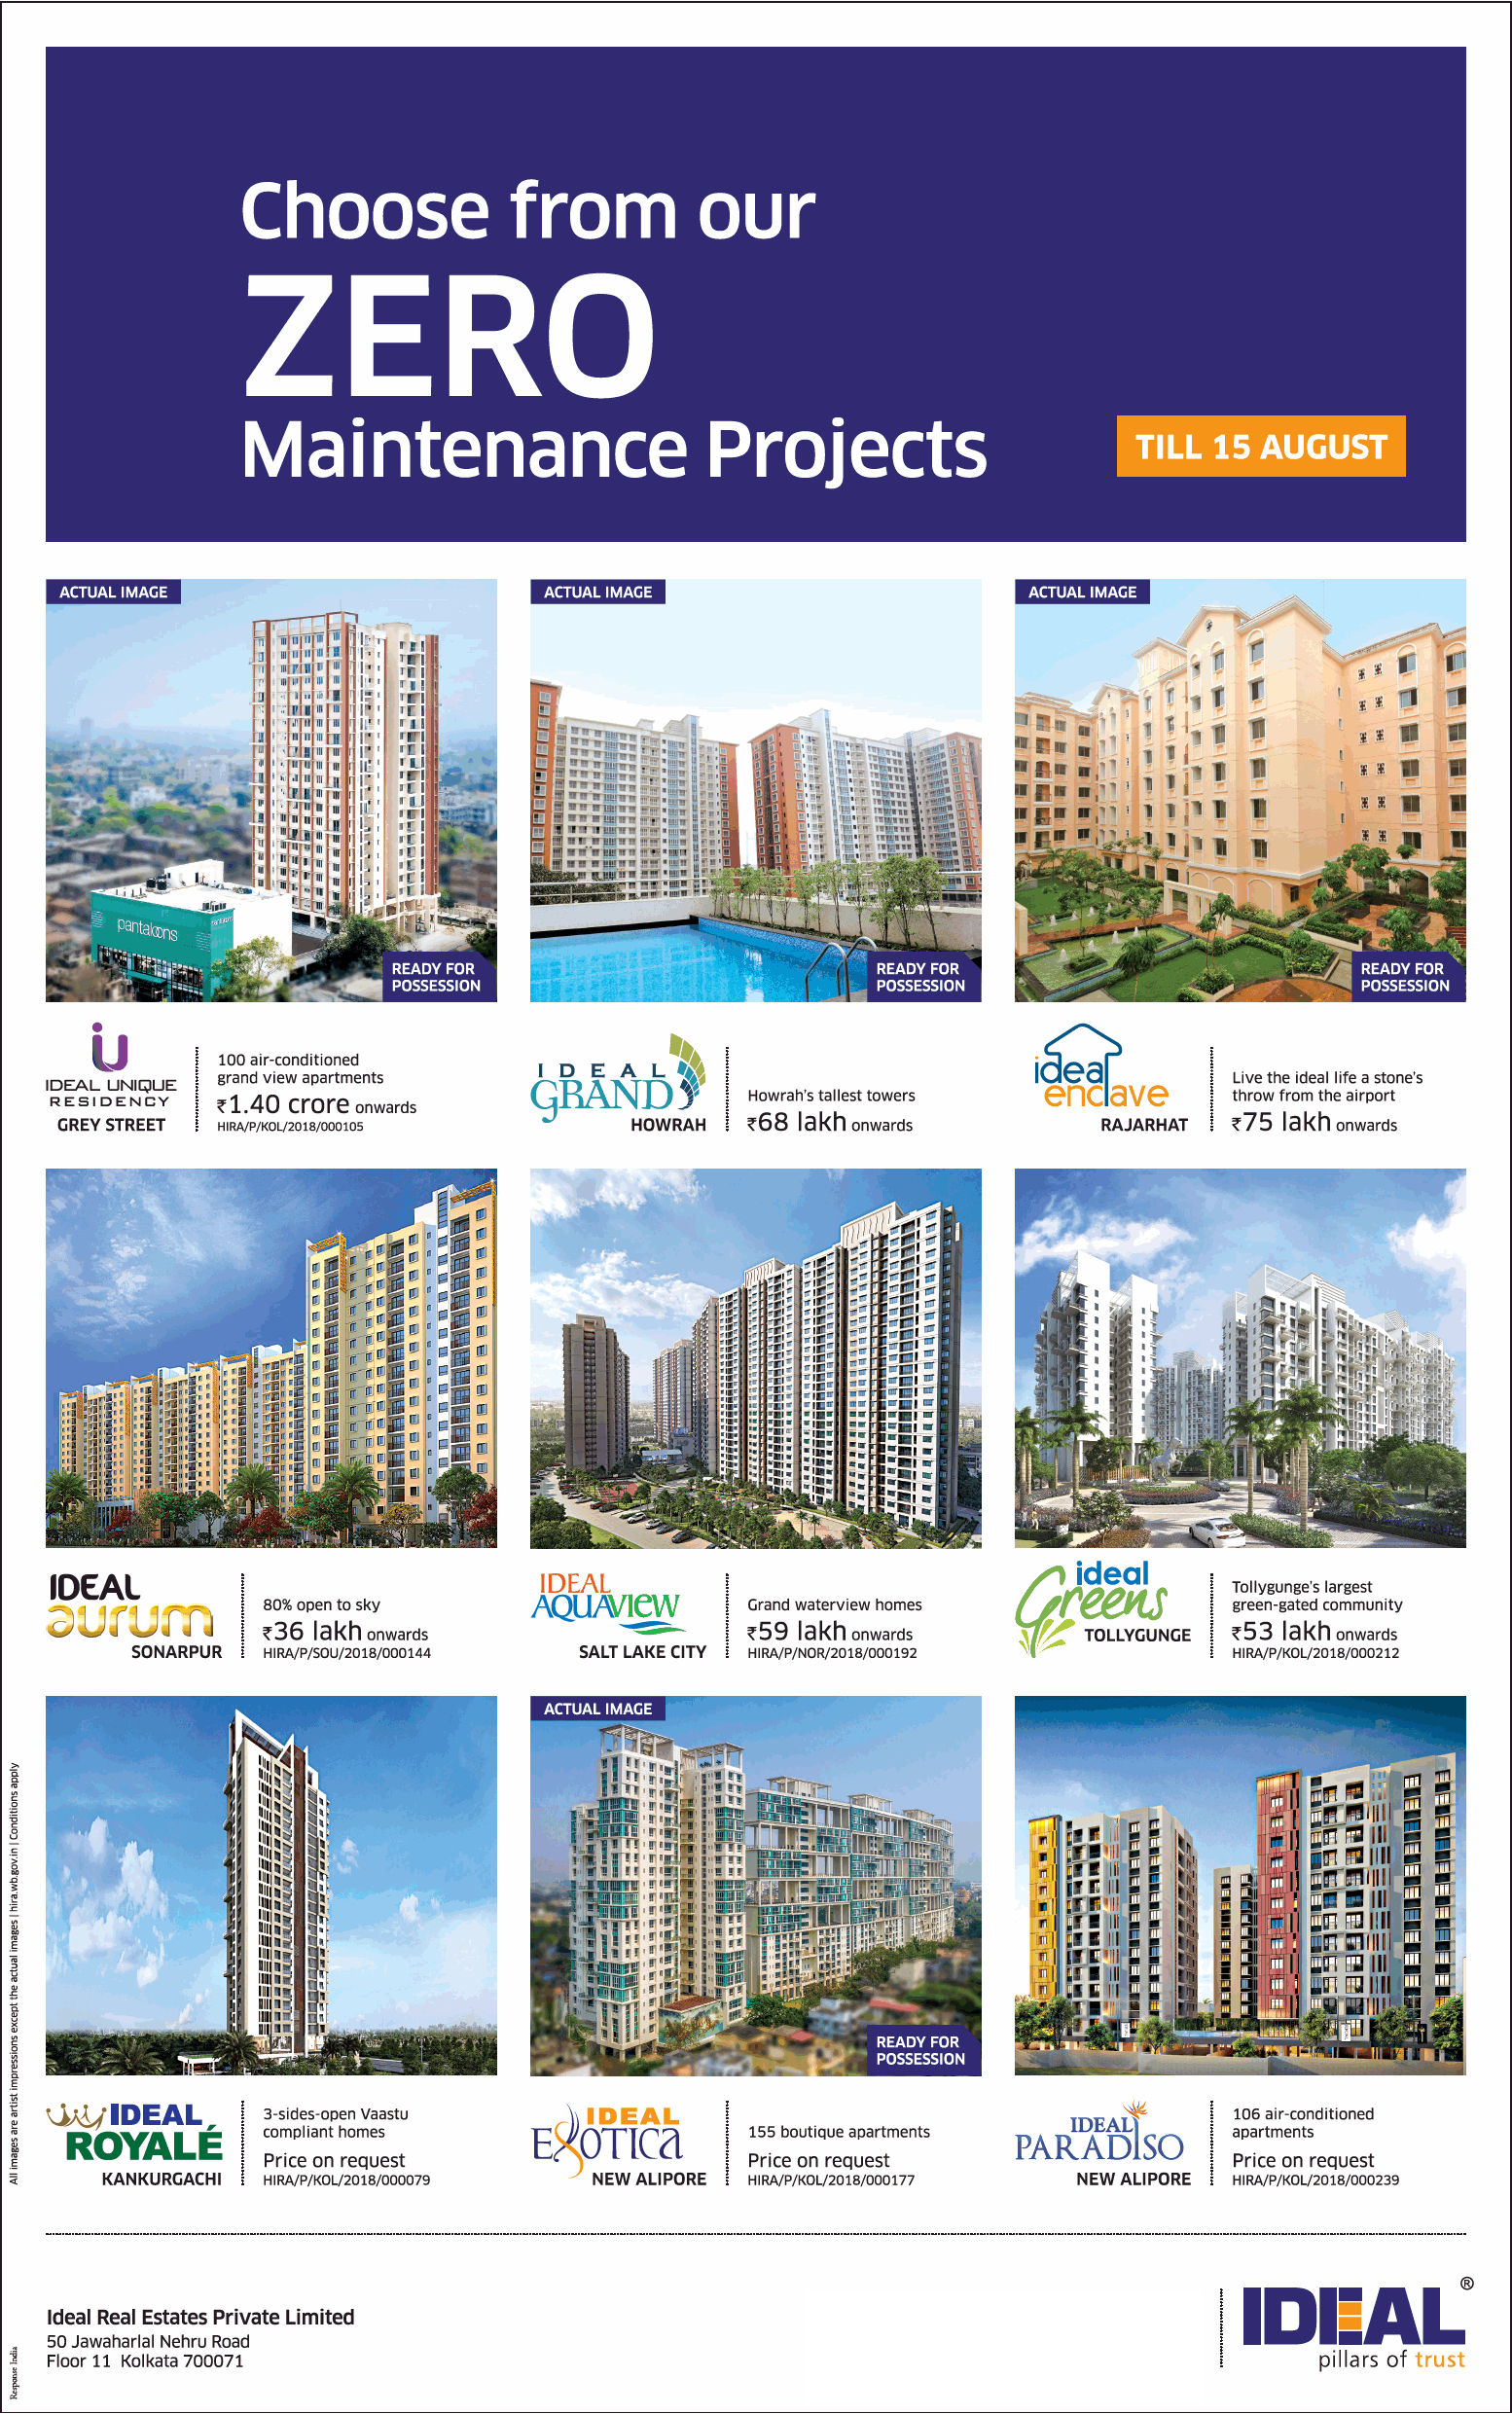 Zero maintenance charges for 5 years at Ideal Real Estates, Kolkata Update